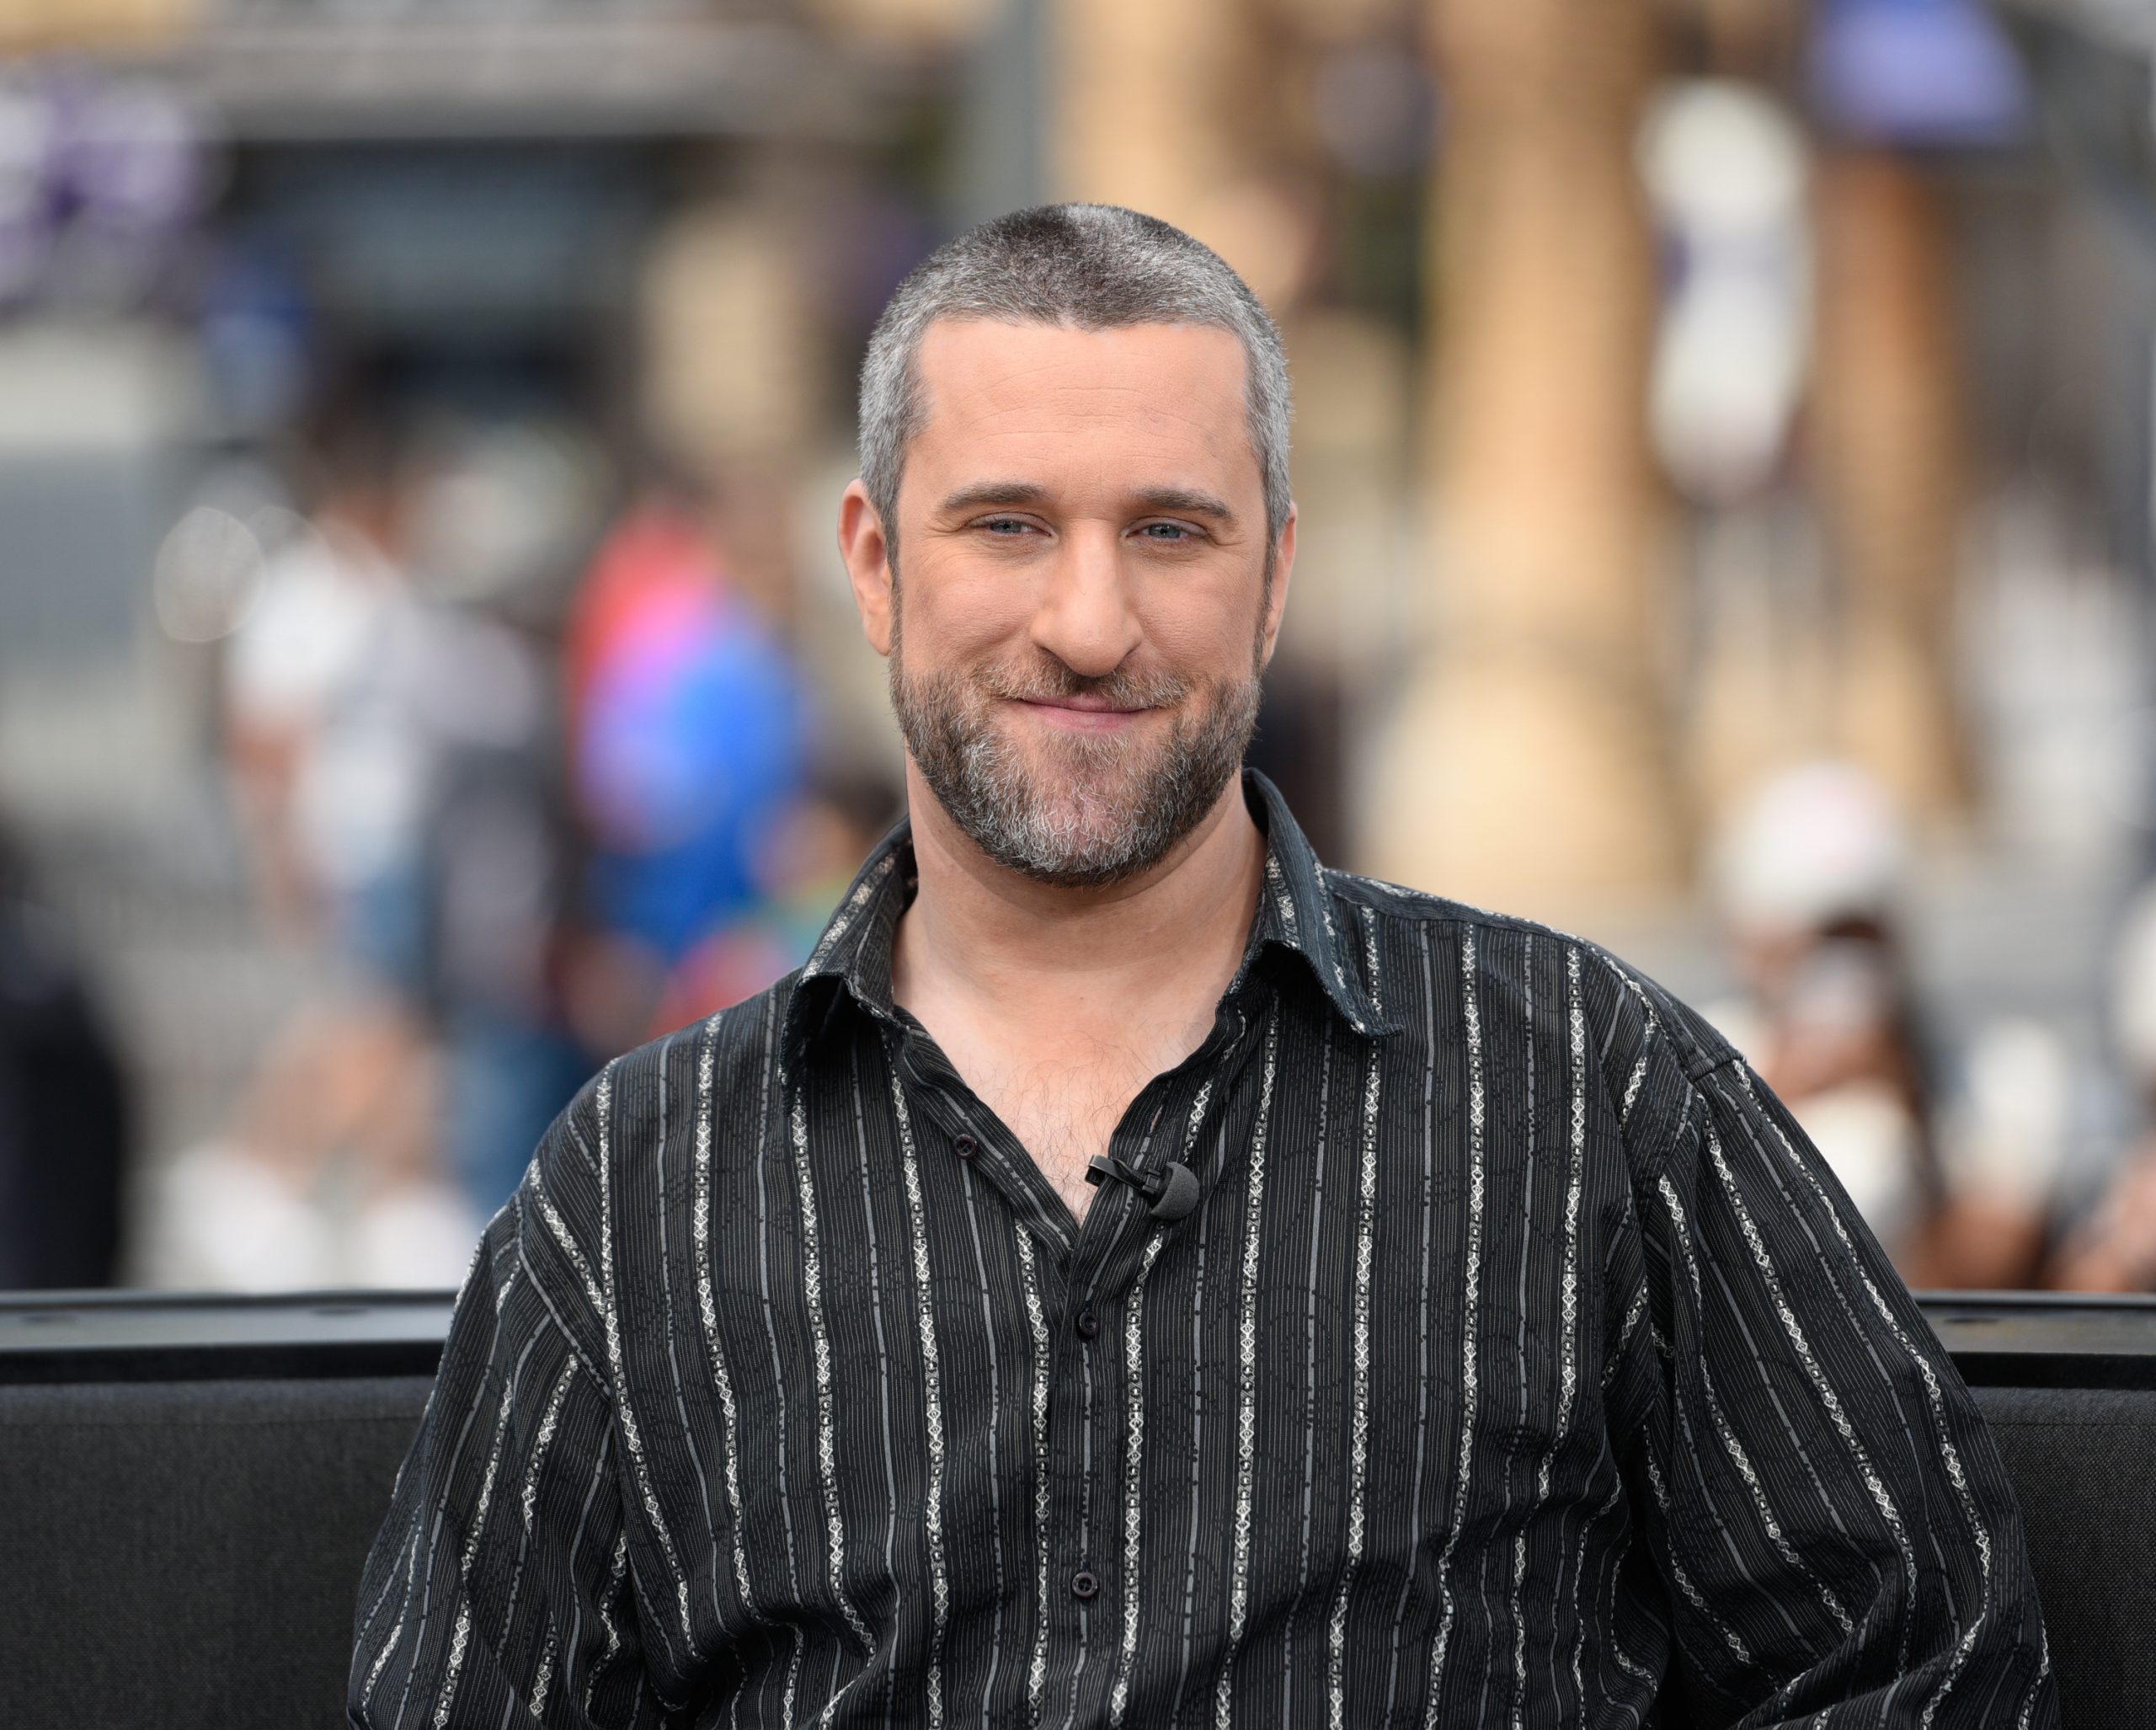 UNIVERSAL CITY, CA - MAY 16:  Dustin Diamond visits "Extra" at Universal Studios Hollywood on May 16, 2016 in Universal City, California.  (Photo by Noel Vasquez/Getty Images)